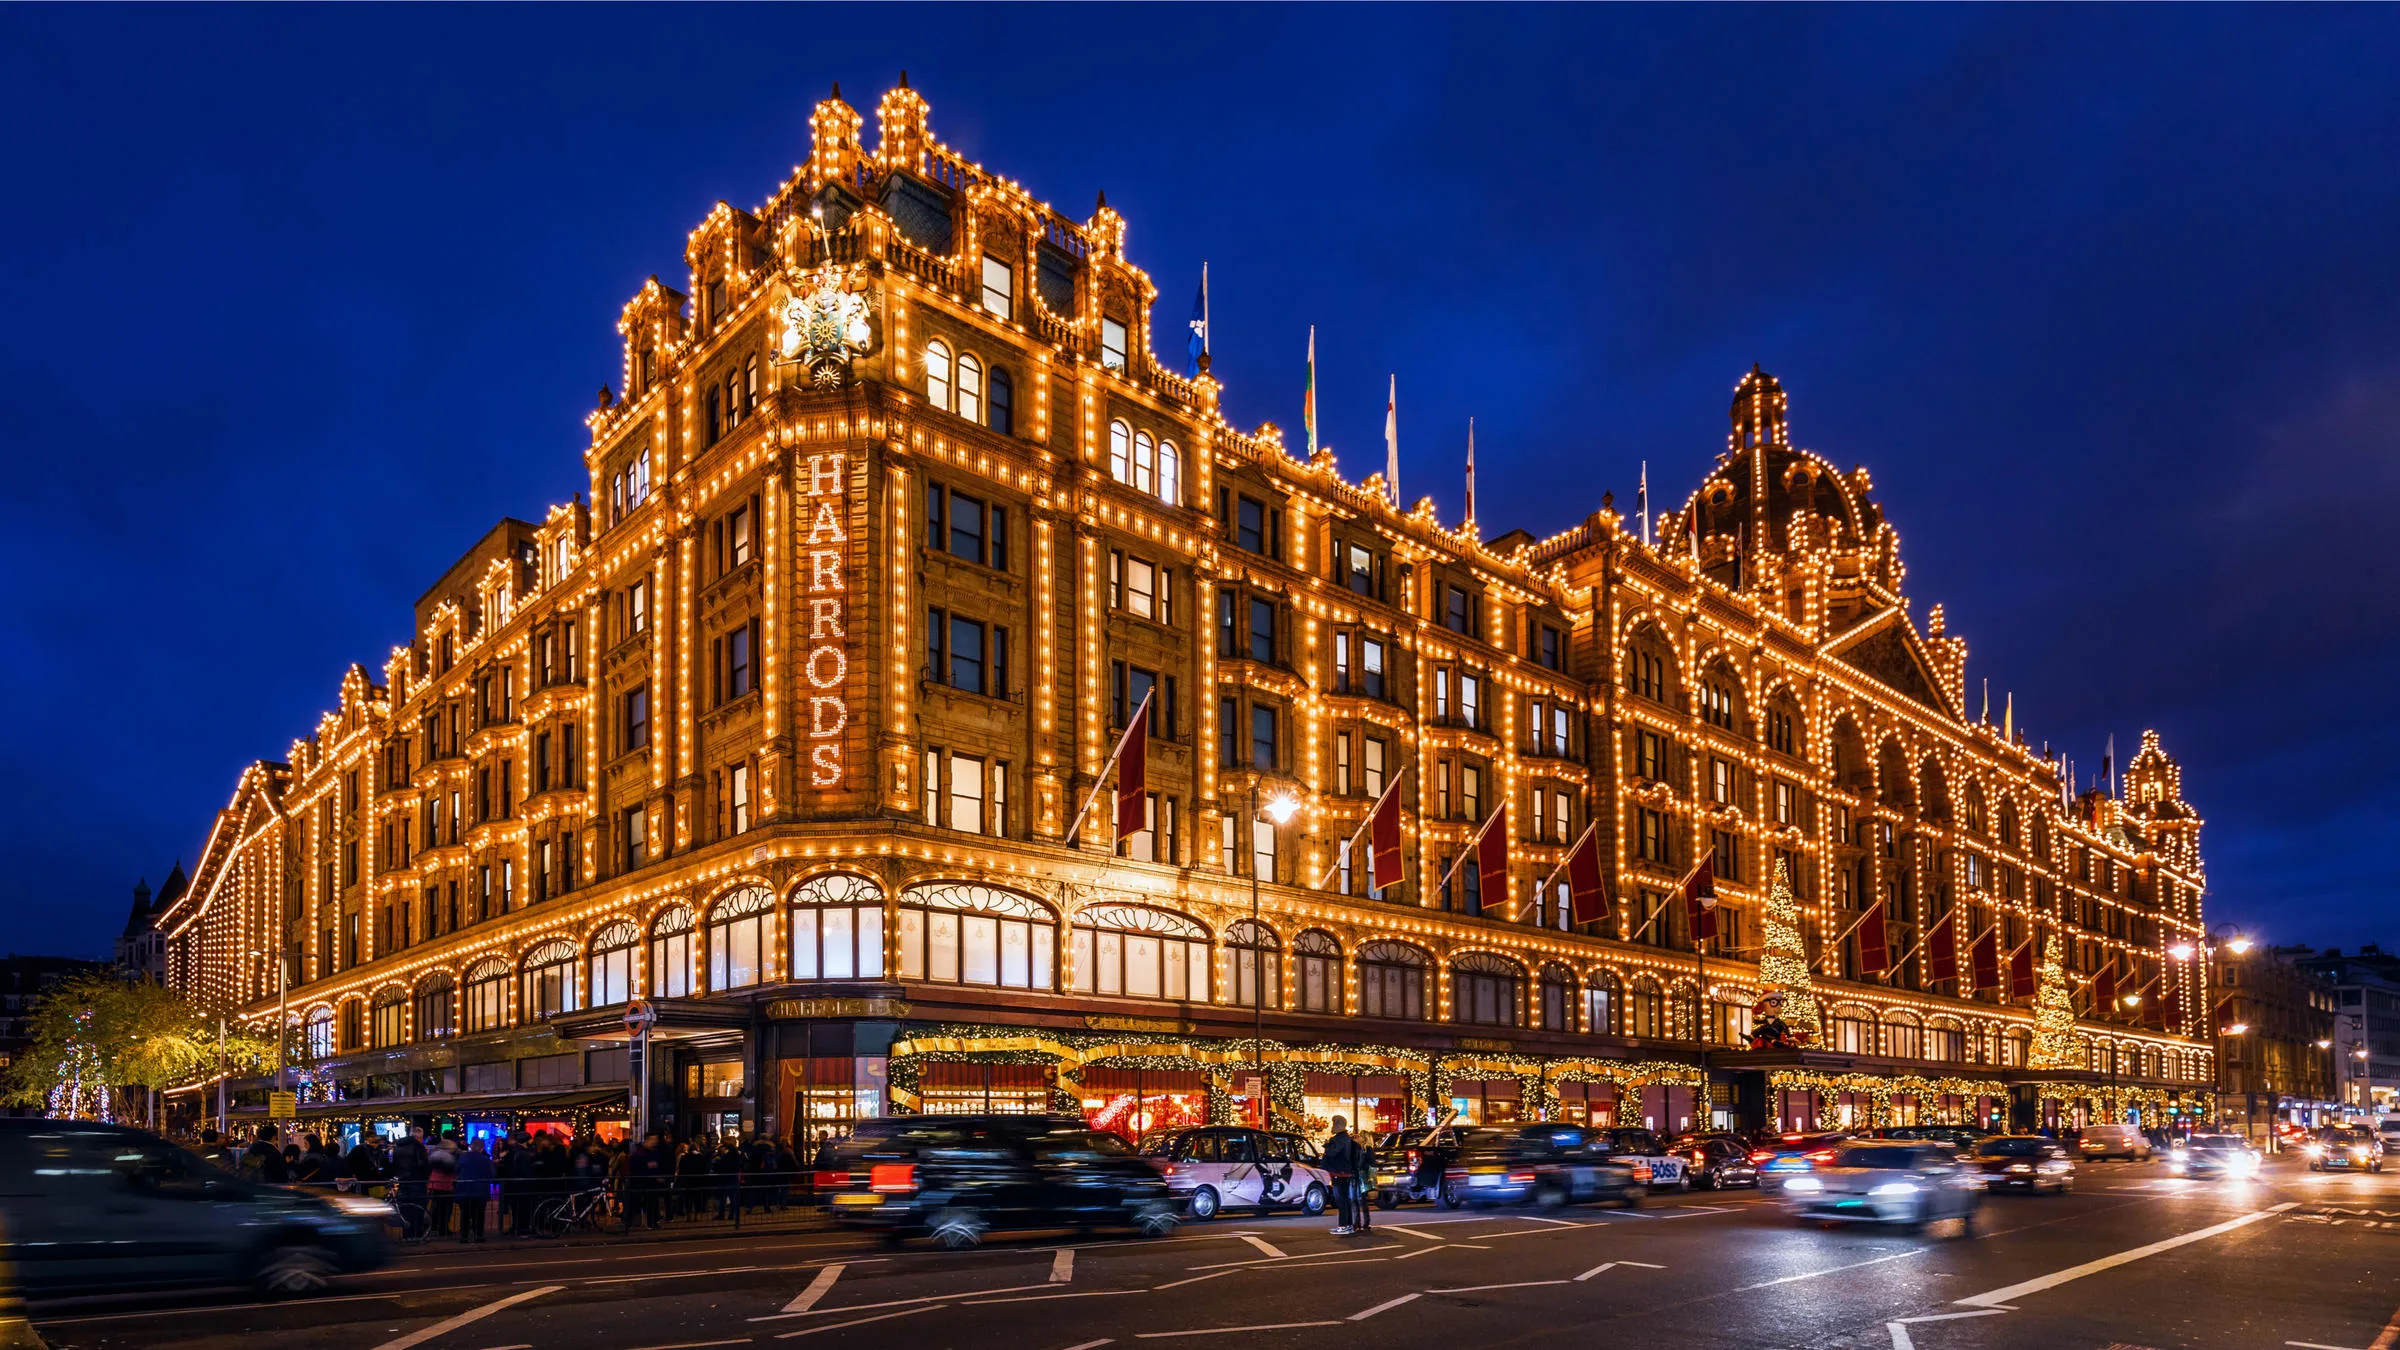 Harrods in United Kingdom, europe | Fragrance,Handbags,Shoes,Clothes,Cosmetics,Sportswear,Watches - Country Helper